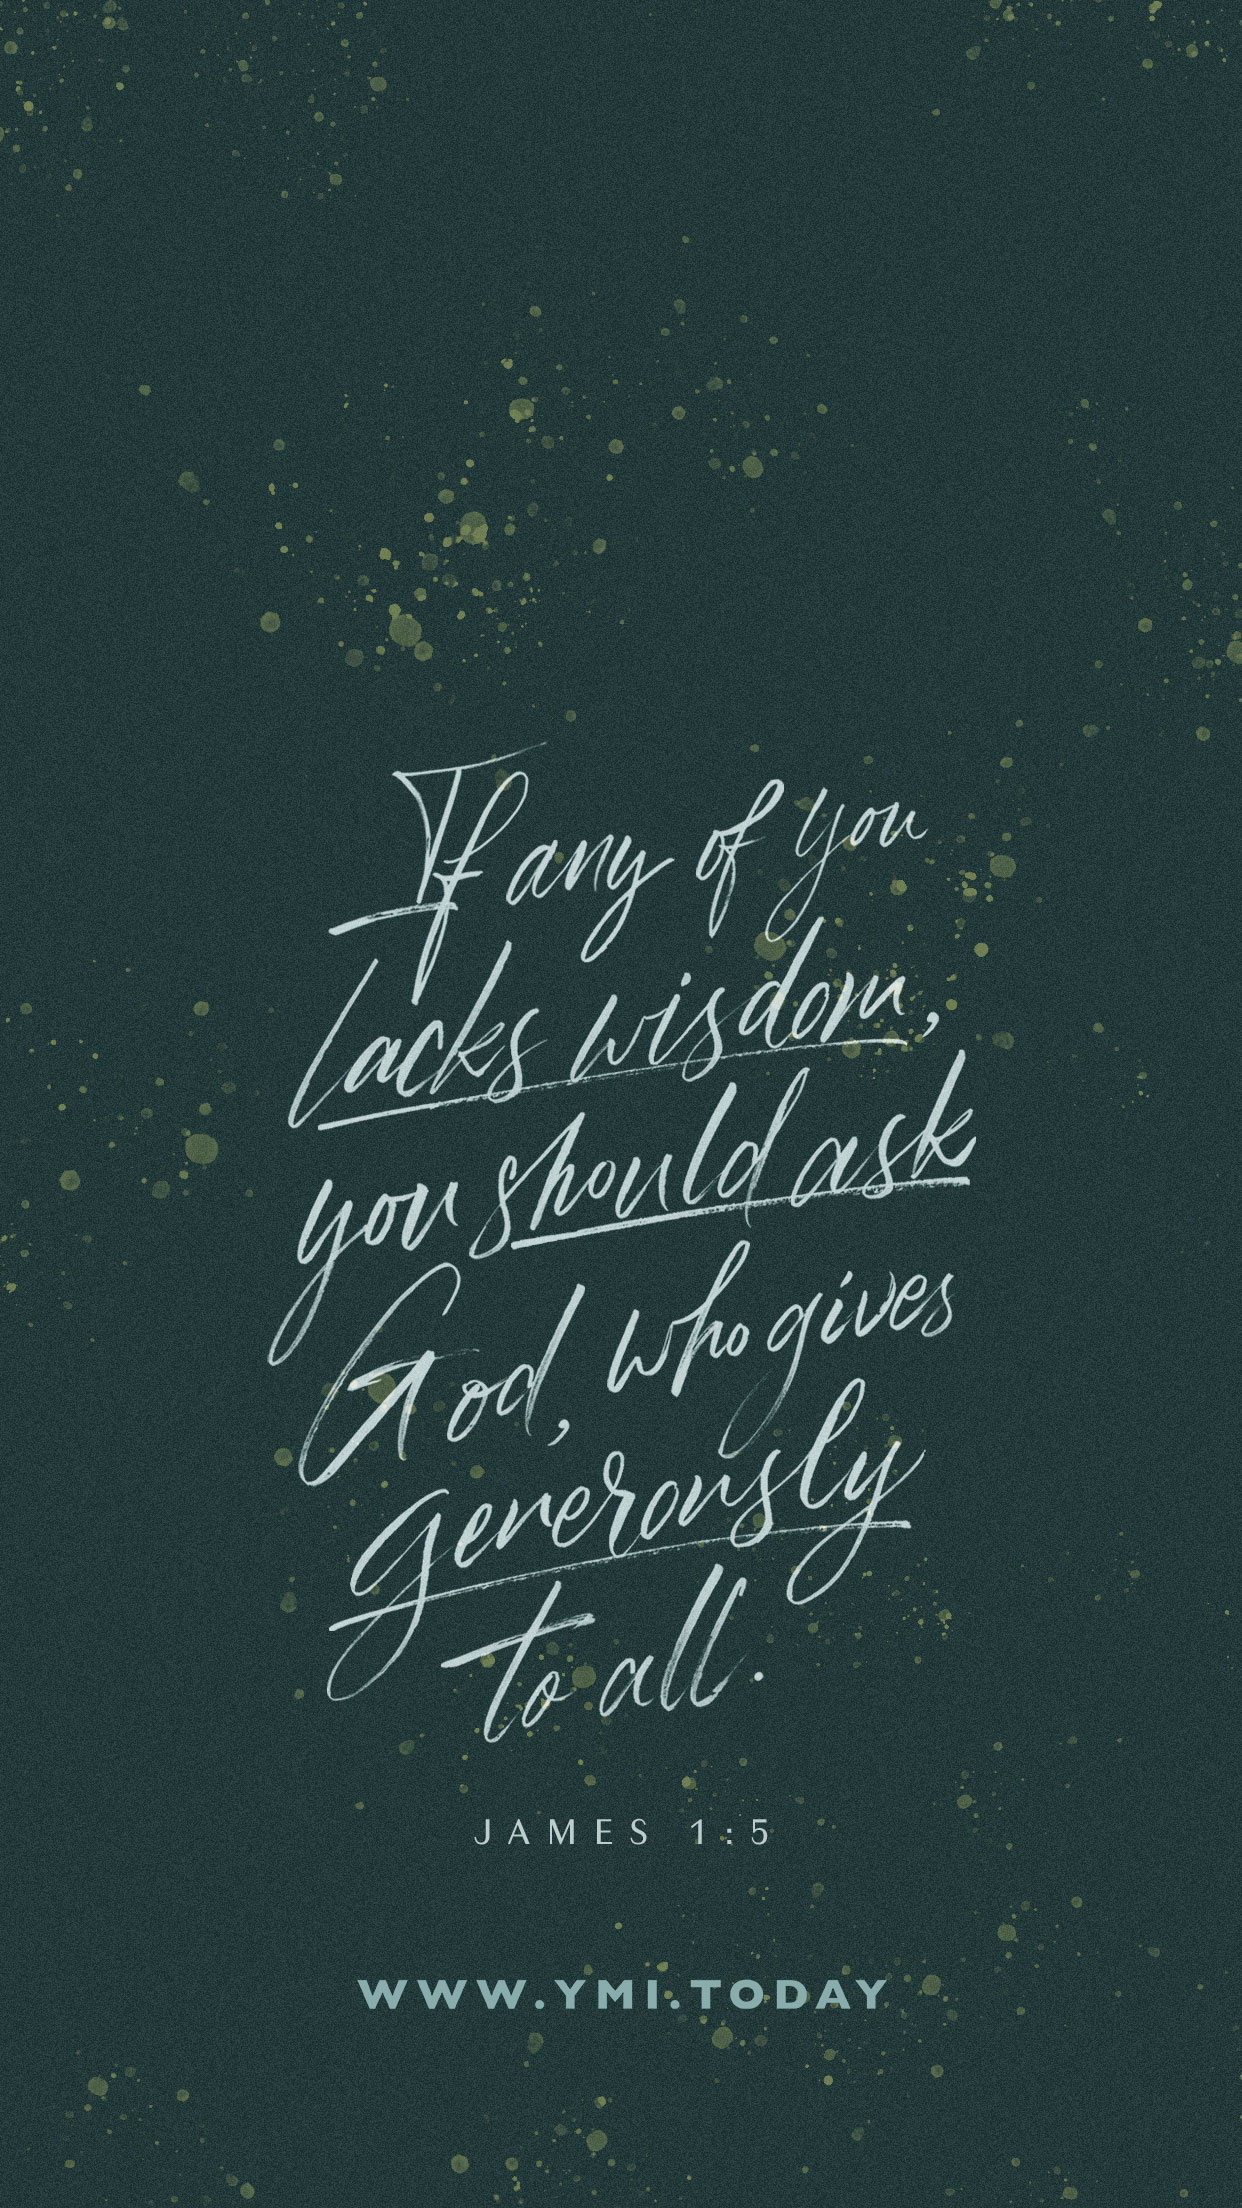 YMI August 2019 Phone Lockscreen - If any of you lacks wisdom, you should ask God, who gives generously to all. - James 1:5